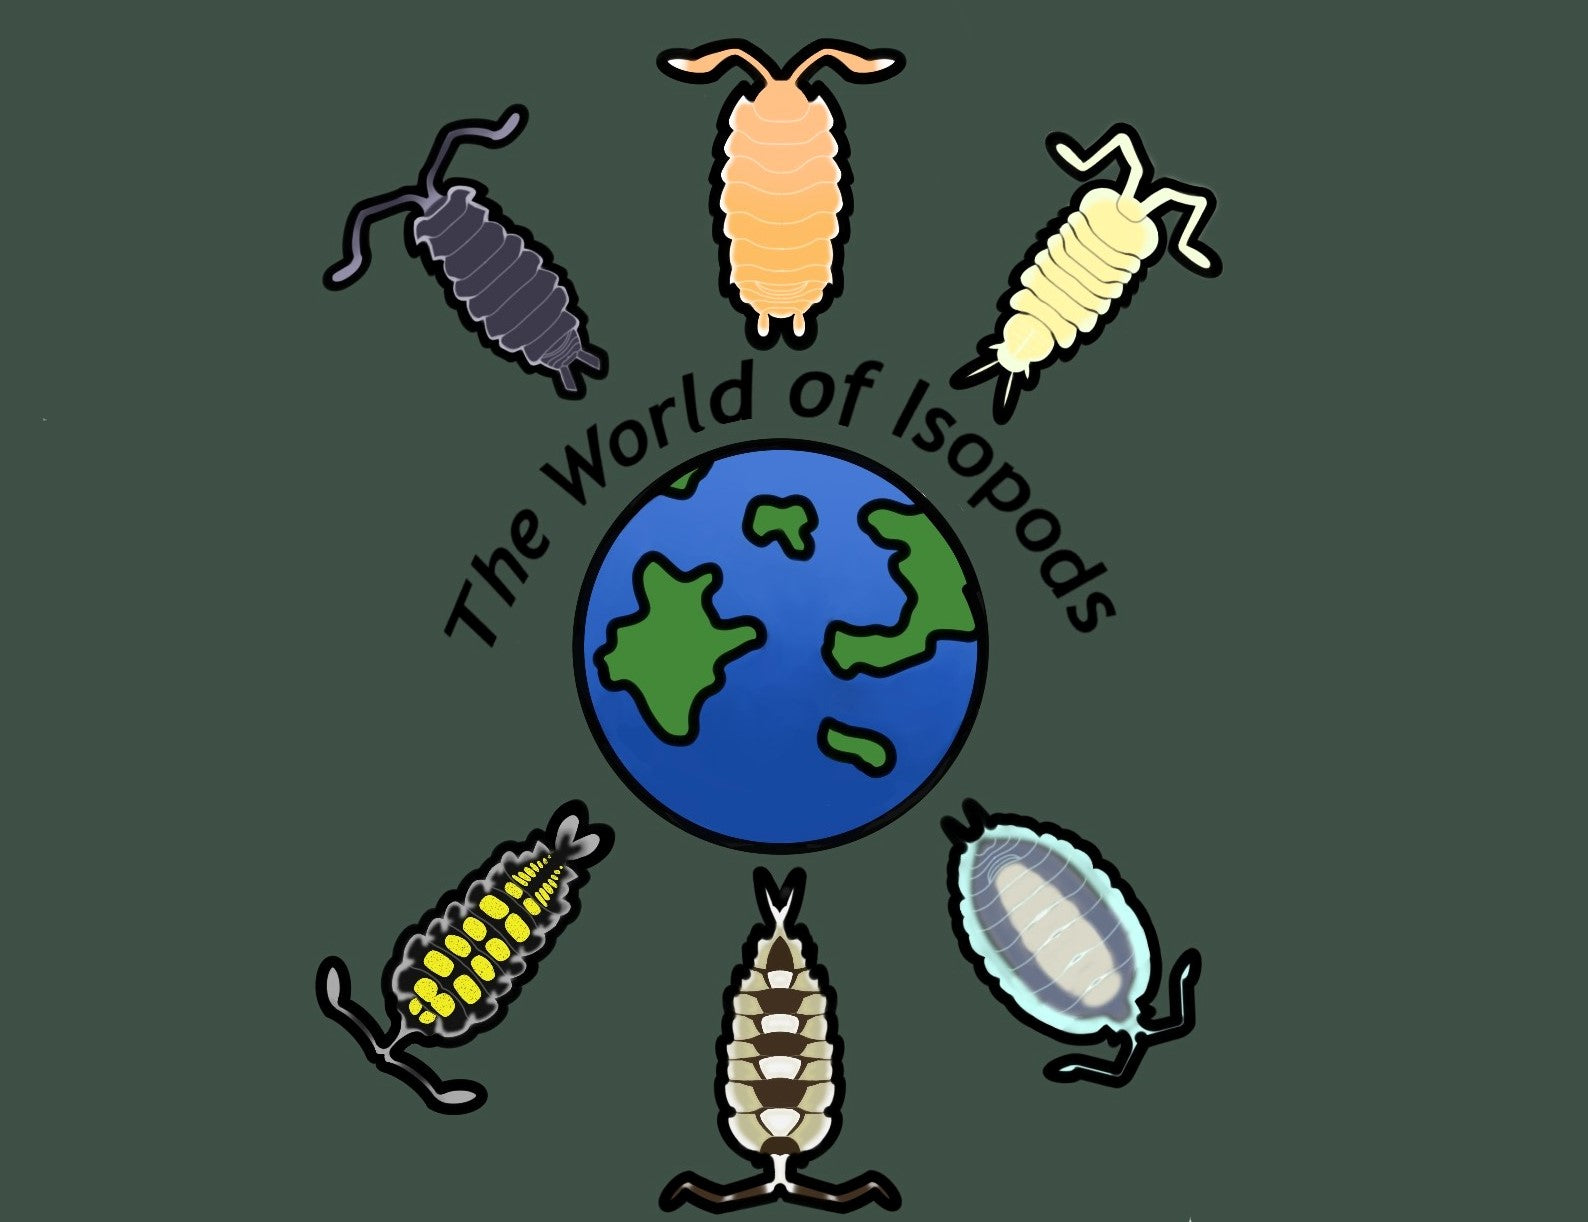 The World of Isopods